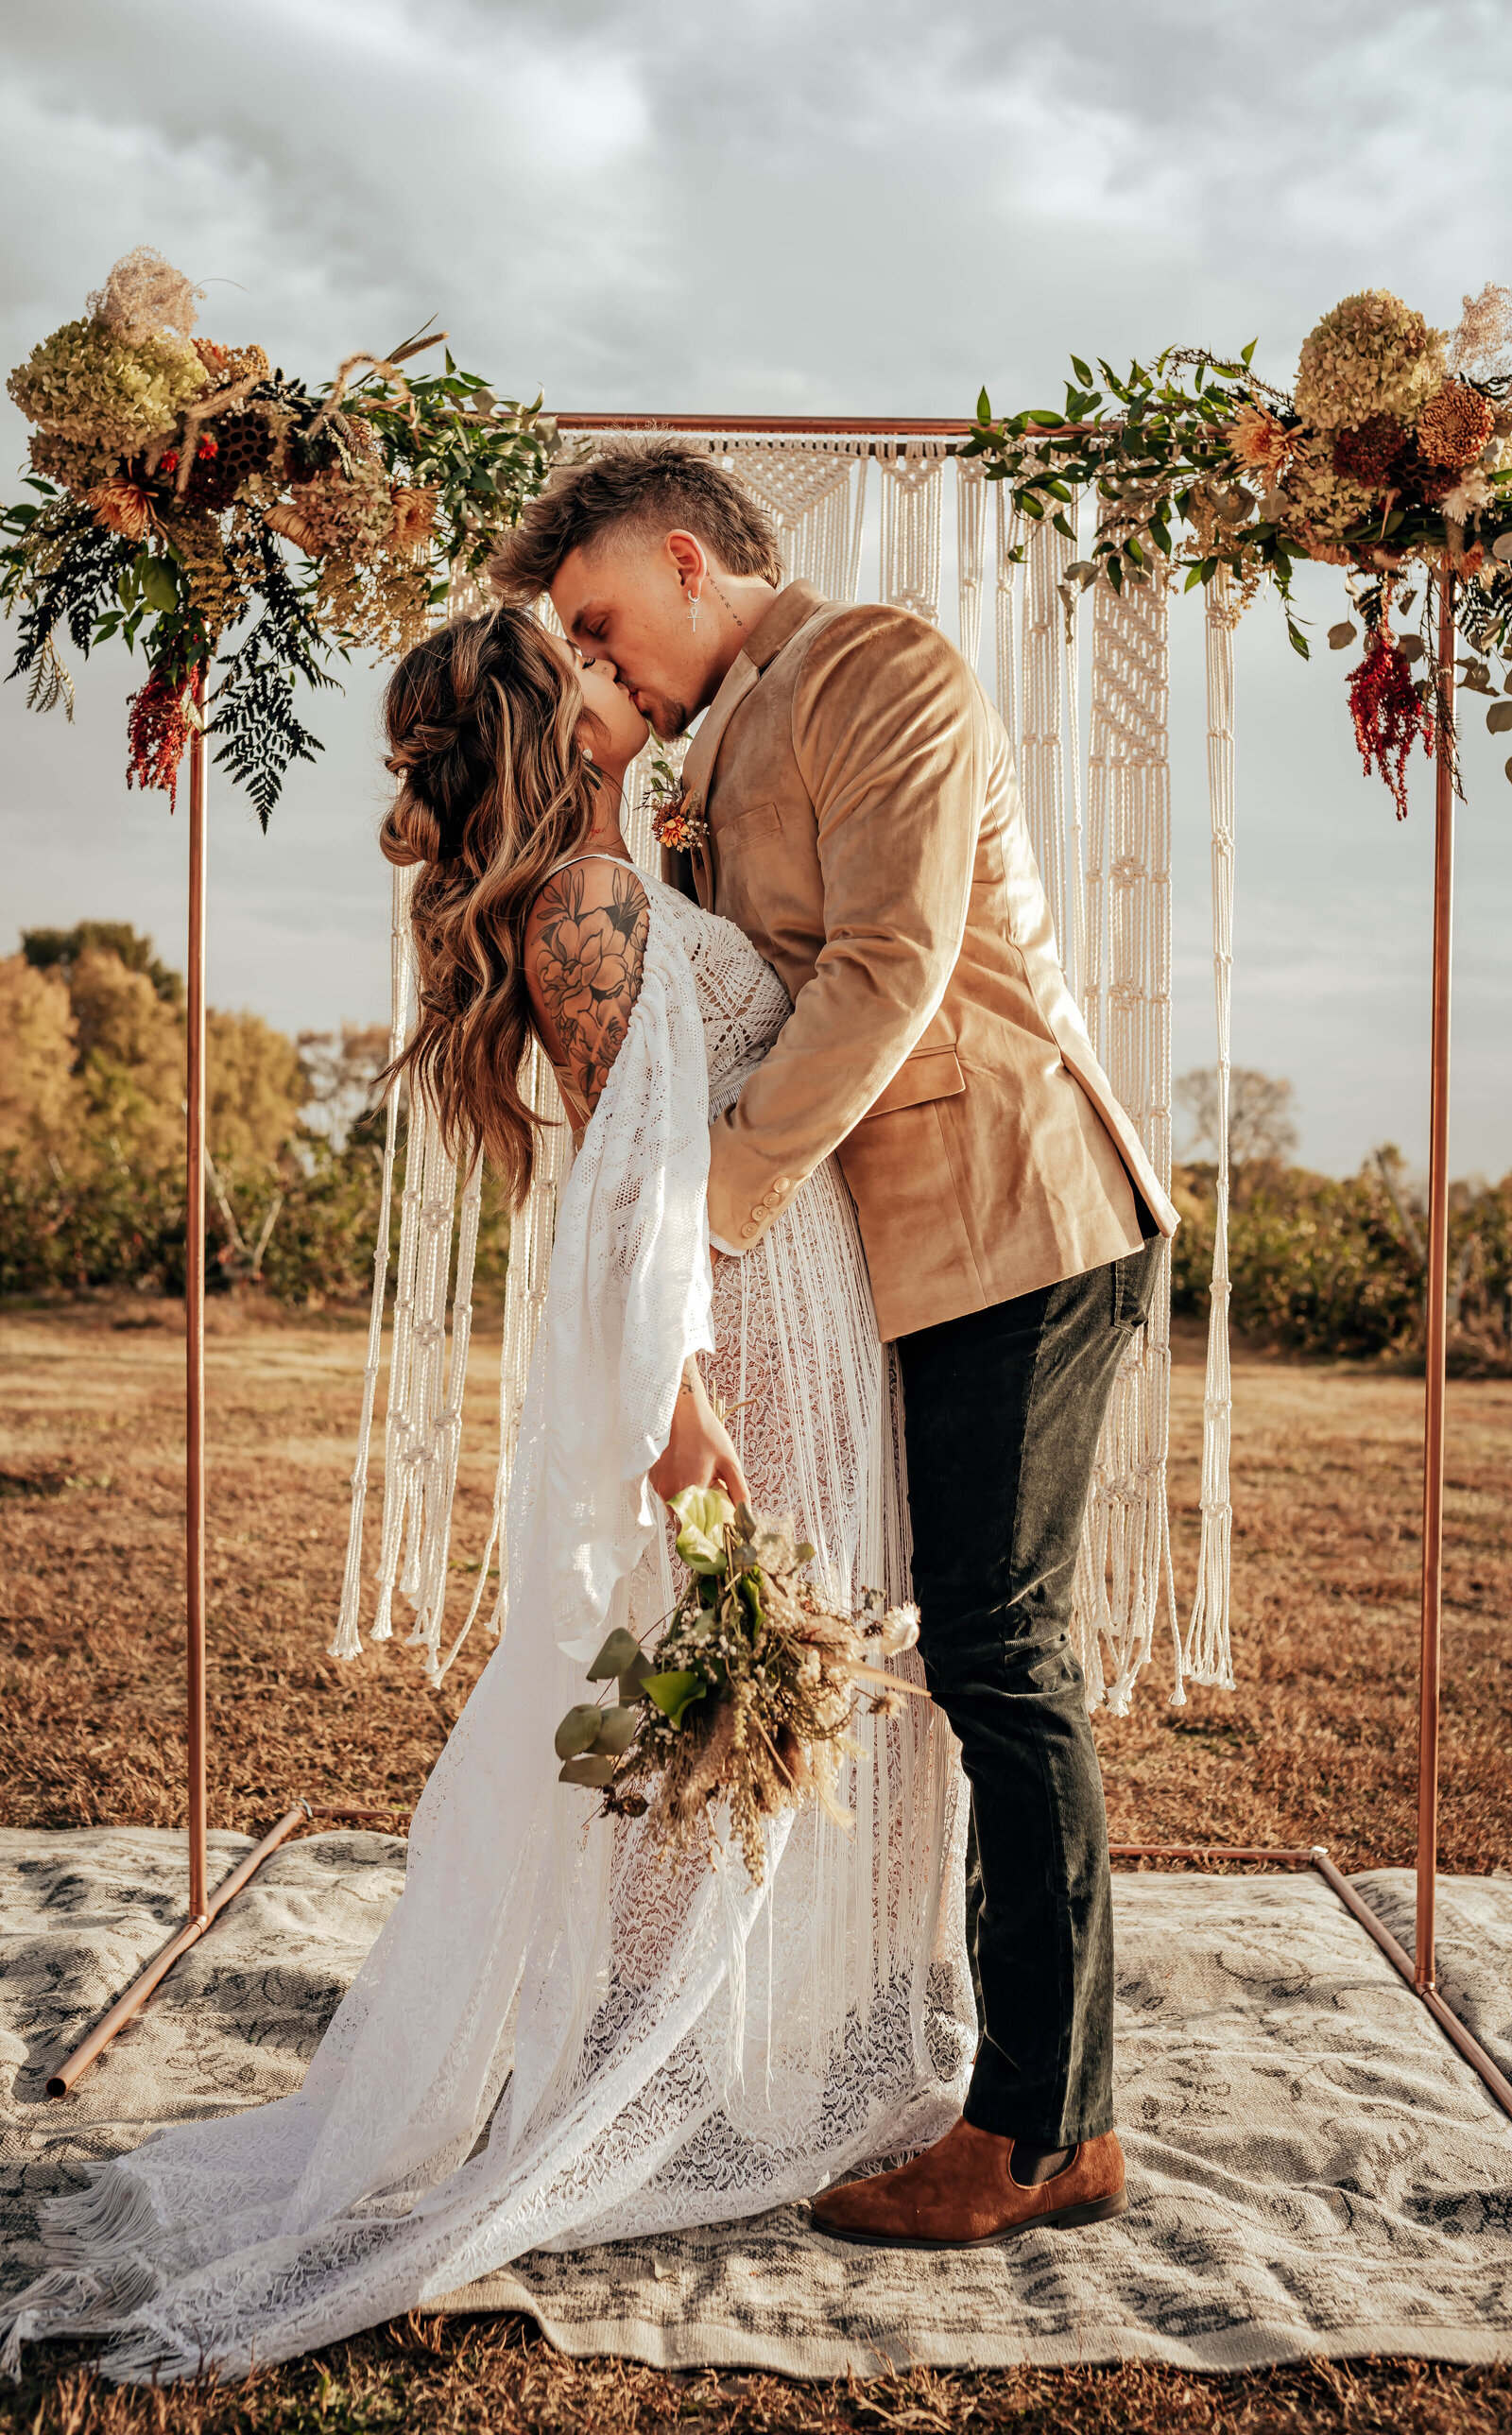 A Bohemian styled shoot for a bride and groom